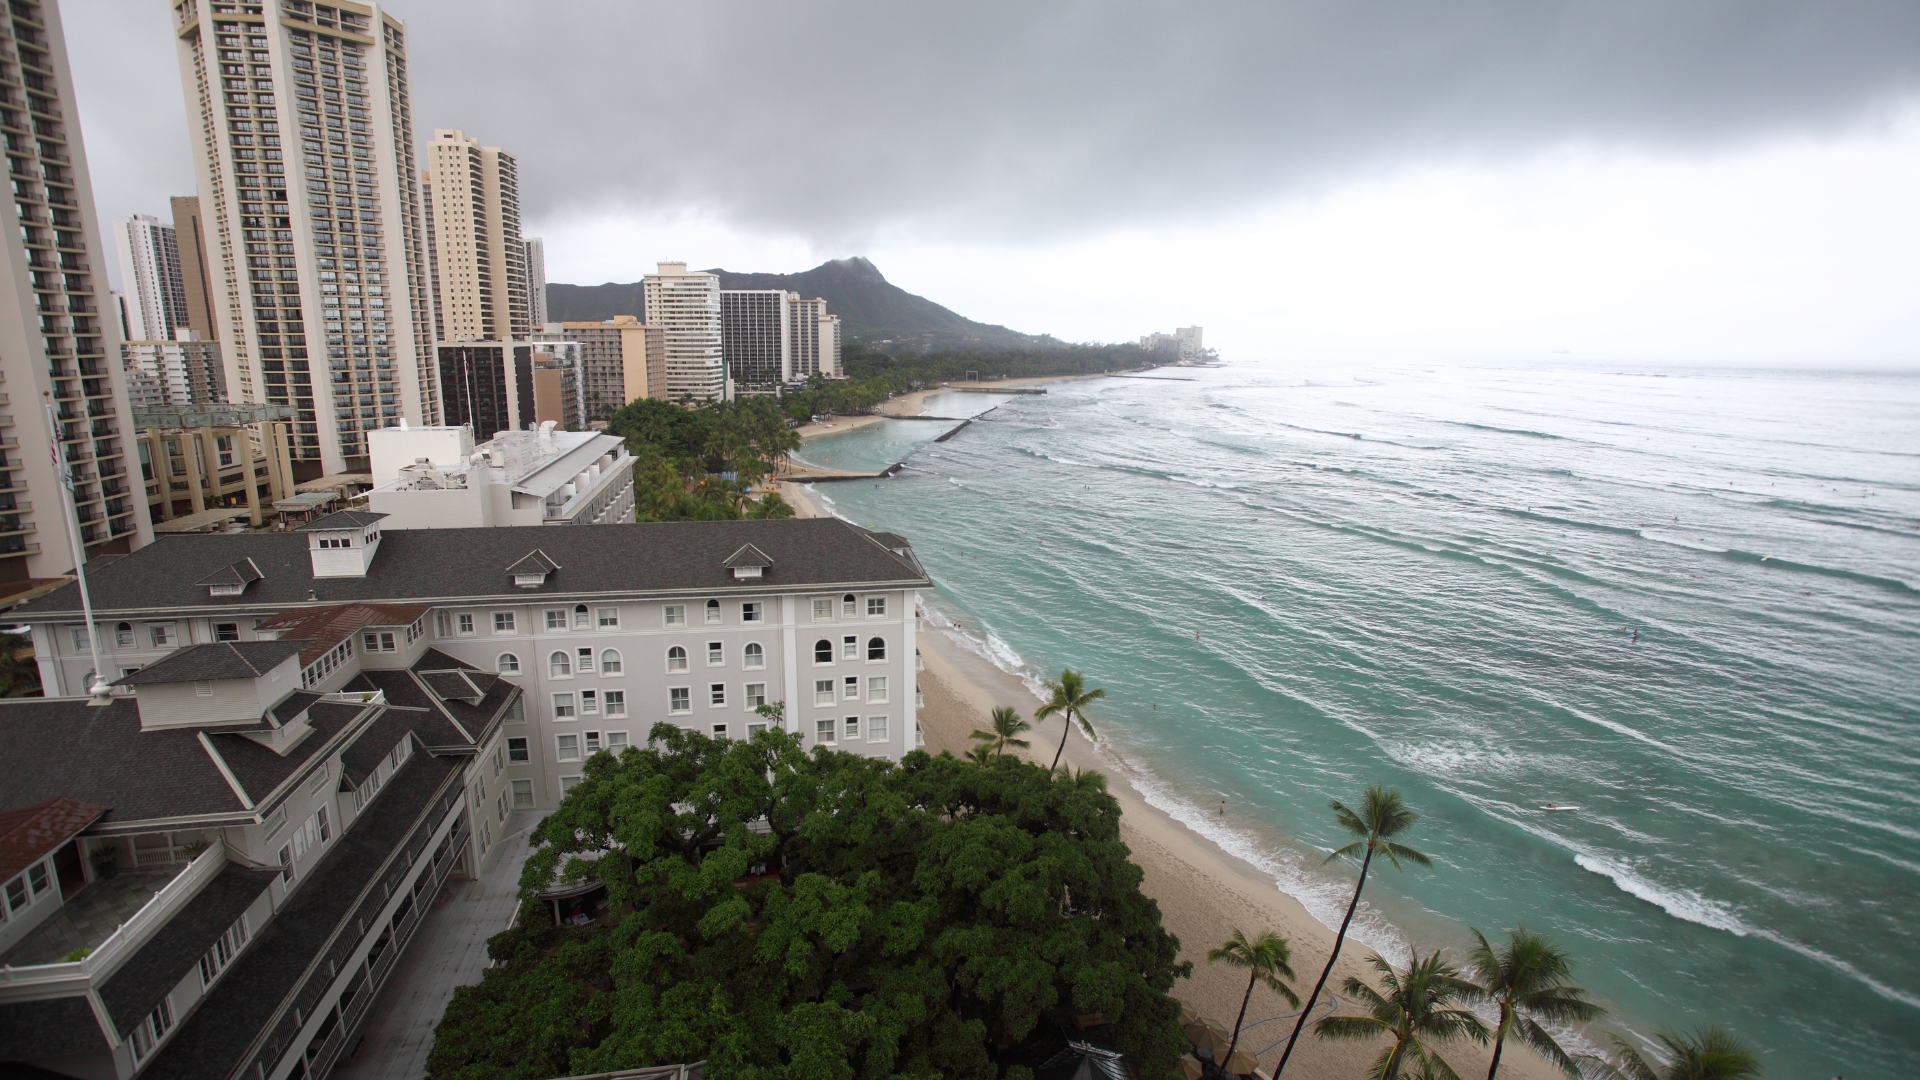 Things to do in Oahu when it rains